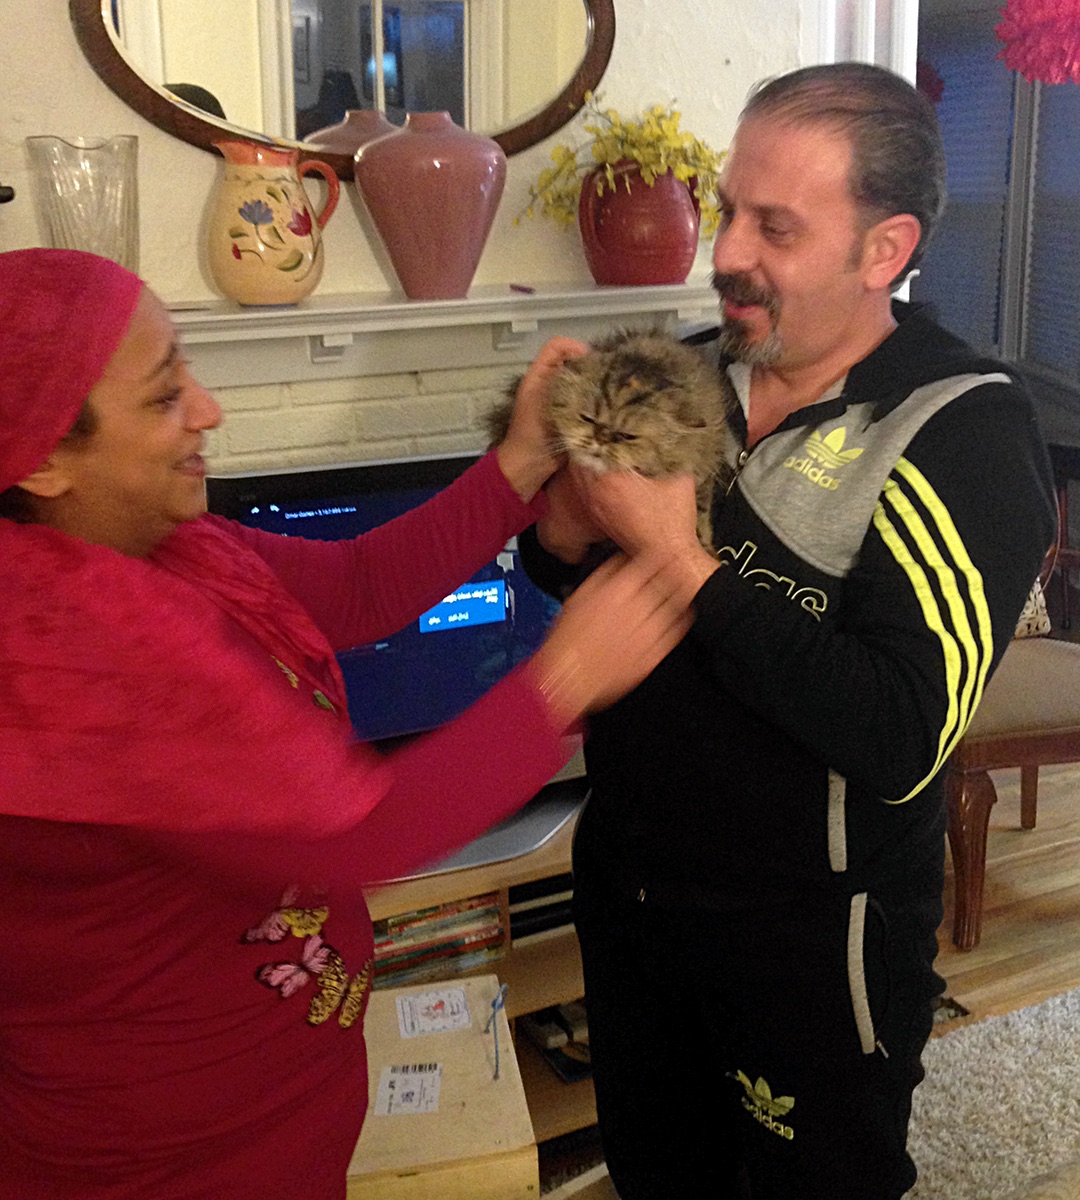 The Ali Dib Family reunited with their cats